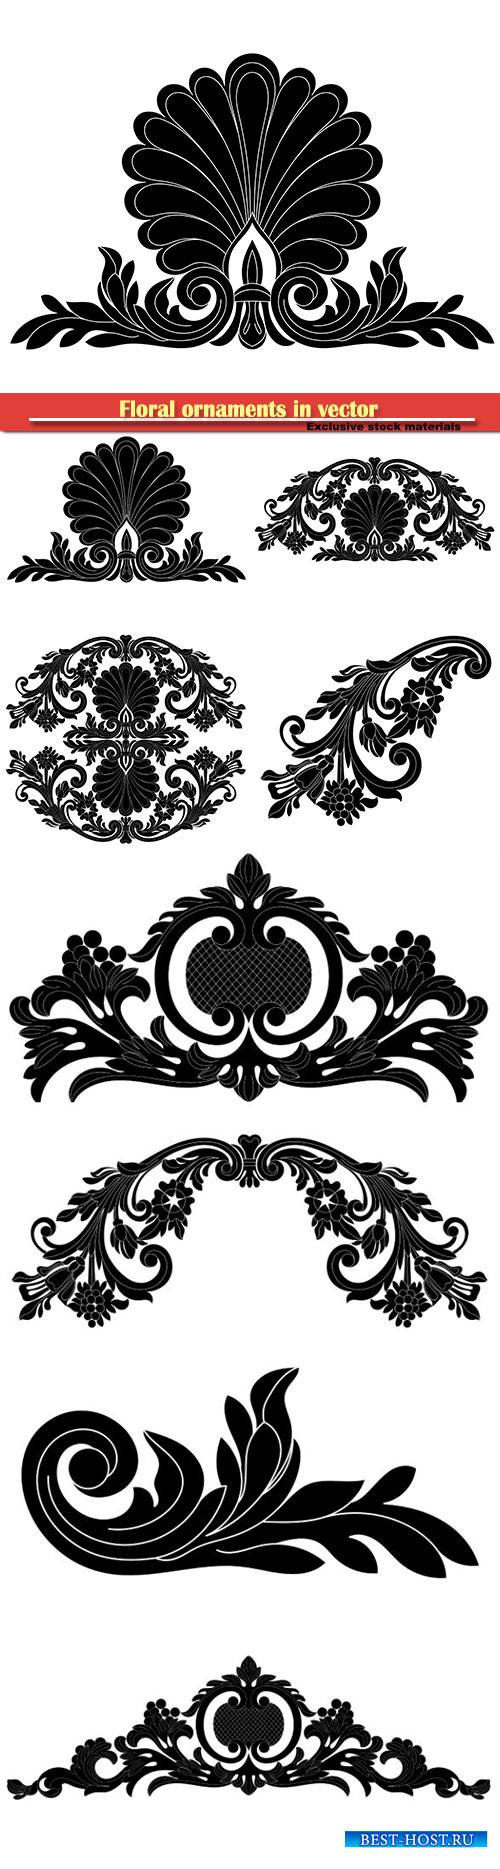 Floral ornaments in vector